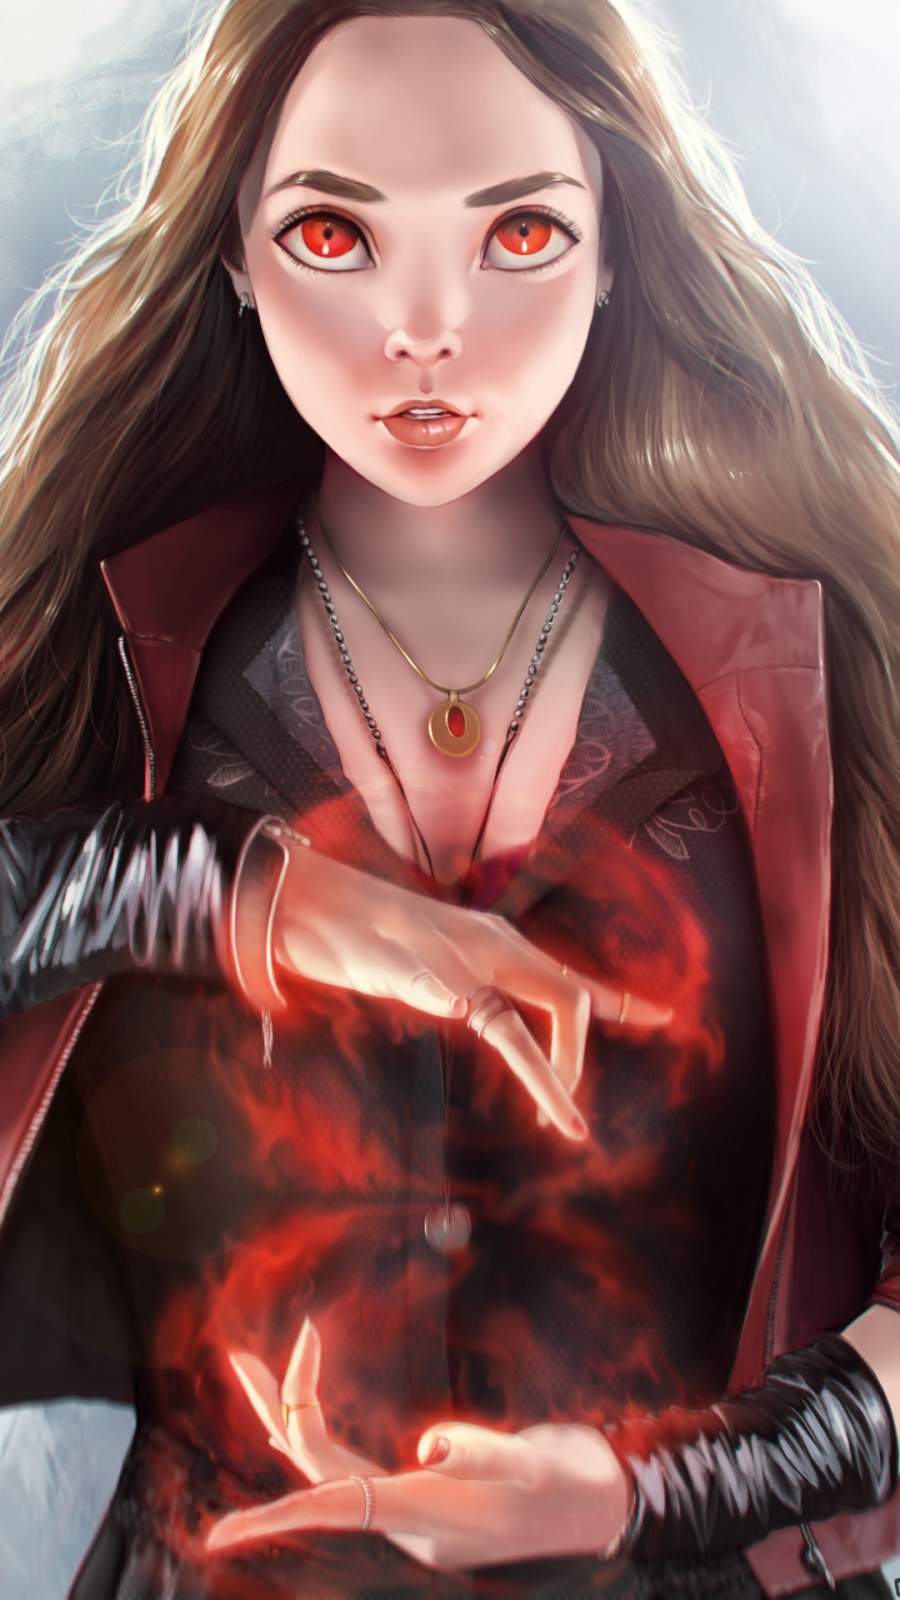 Cute Scarlet Witch IPhone Wallpaper - IPhone Wallpapers : iPhone Wallpapers